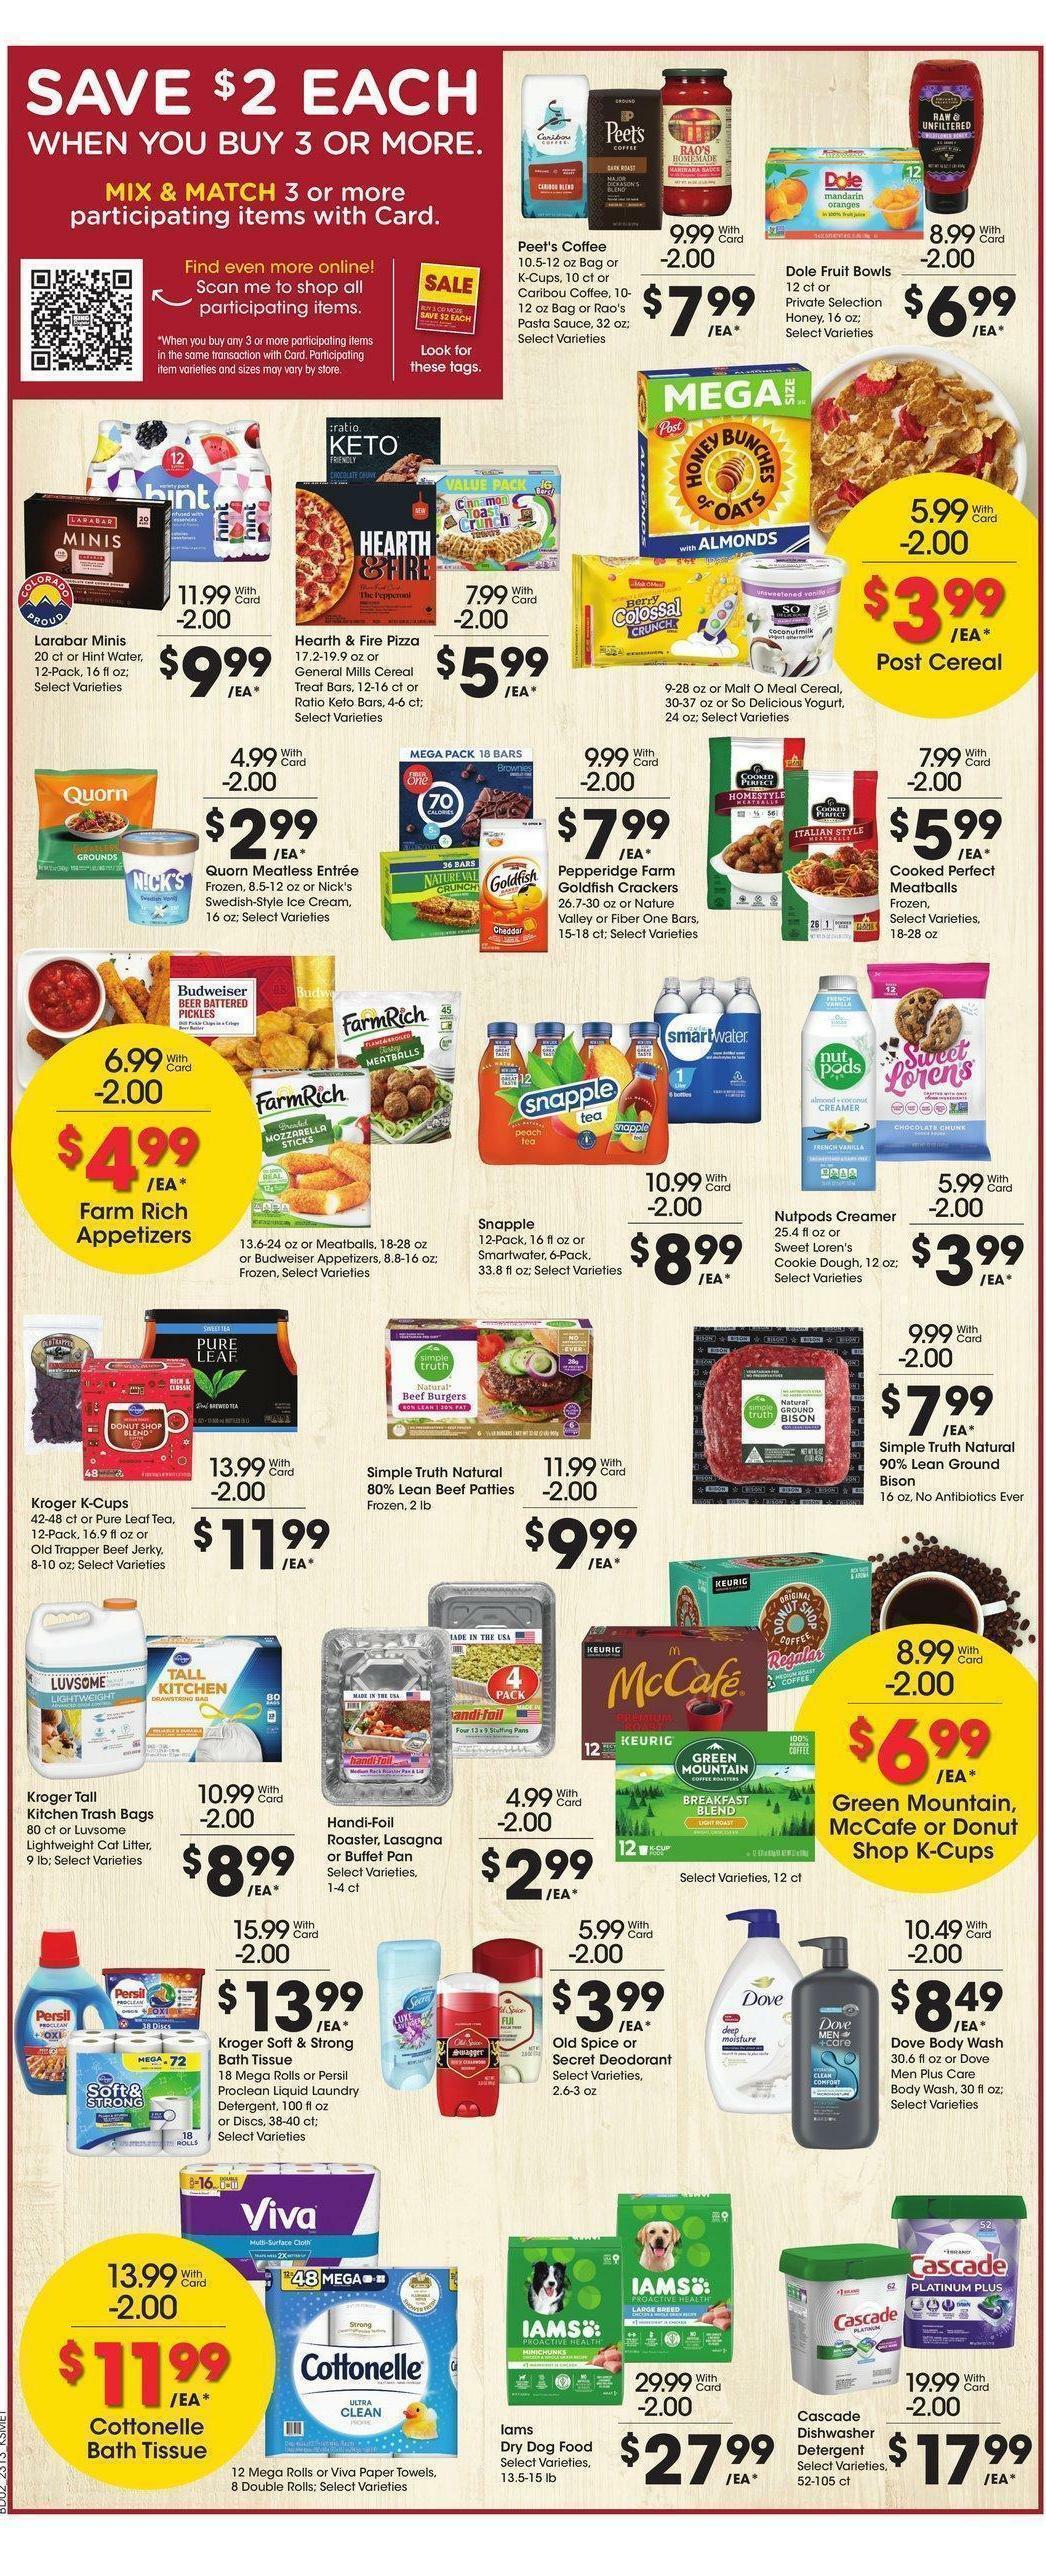 King Soopers Weekly Ad from April 26